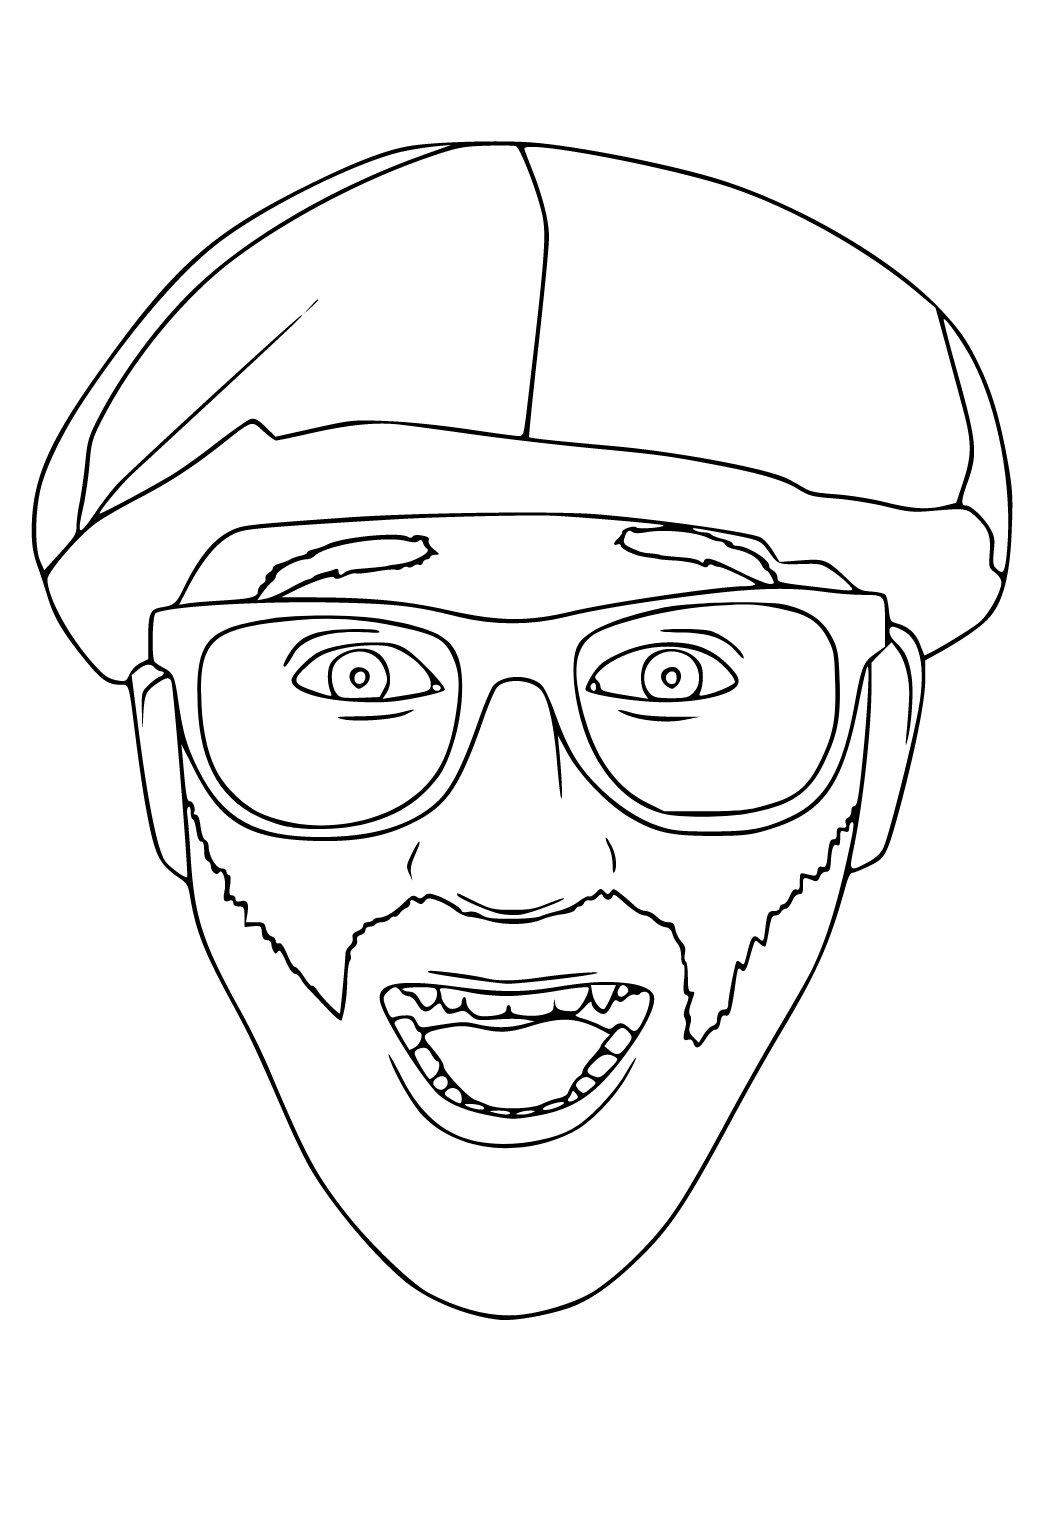 Free printable blippi face coloring page for adults and kids